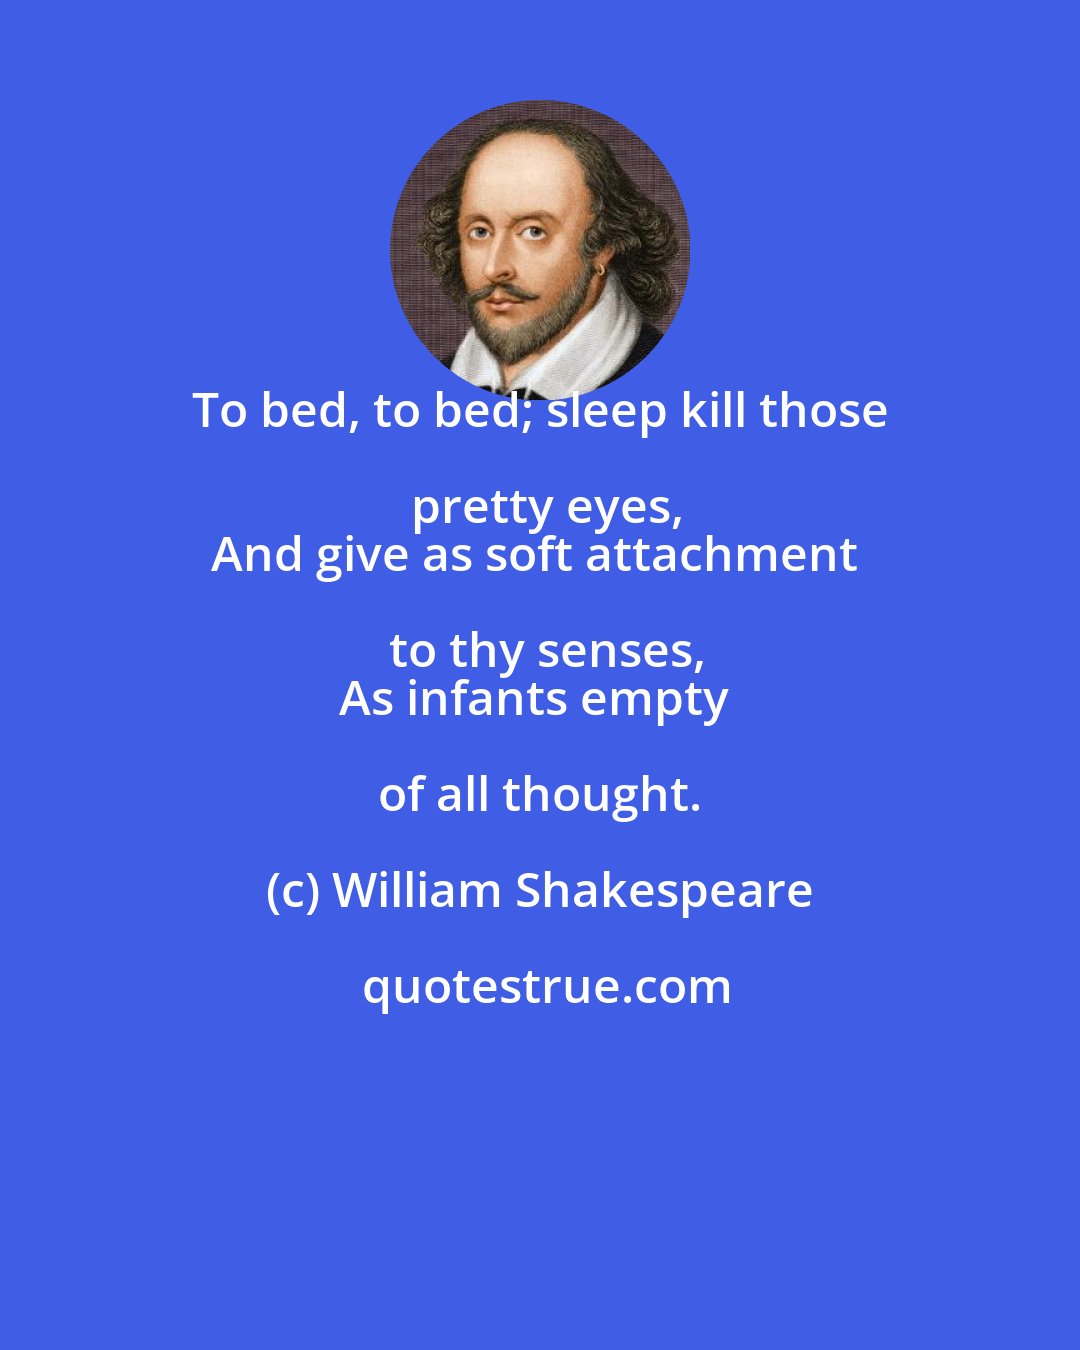 William Shakespeare: To bed, to bed; sleep kill those pretty eyes,
And give as soft attachment to thy senses,
As infants empty of all thought.